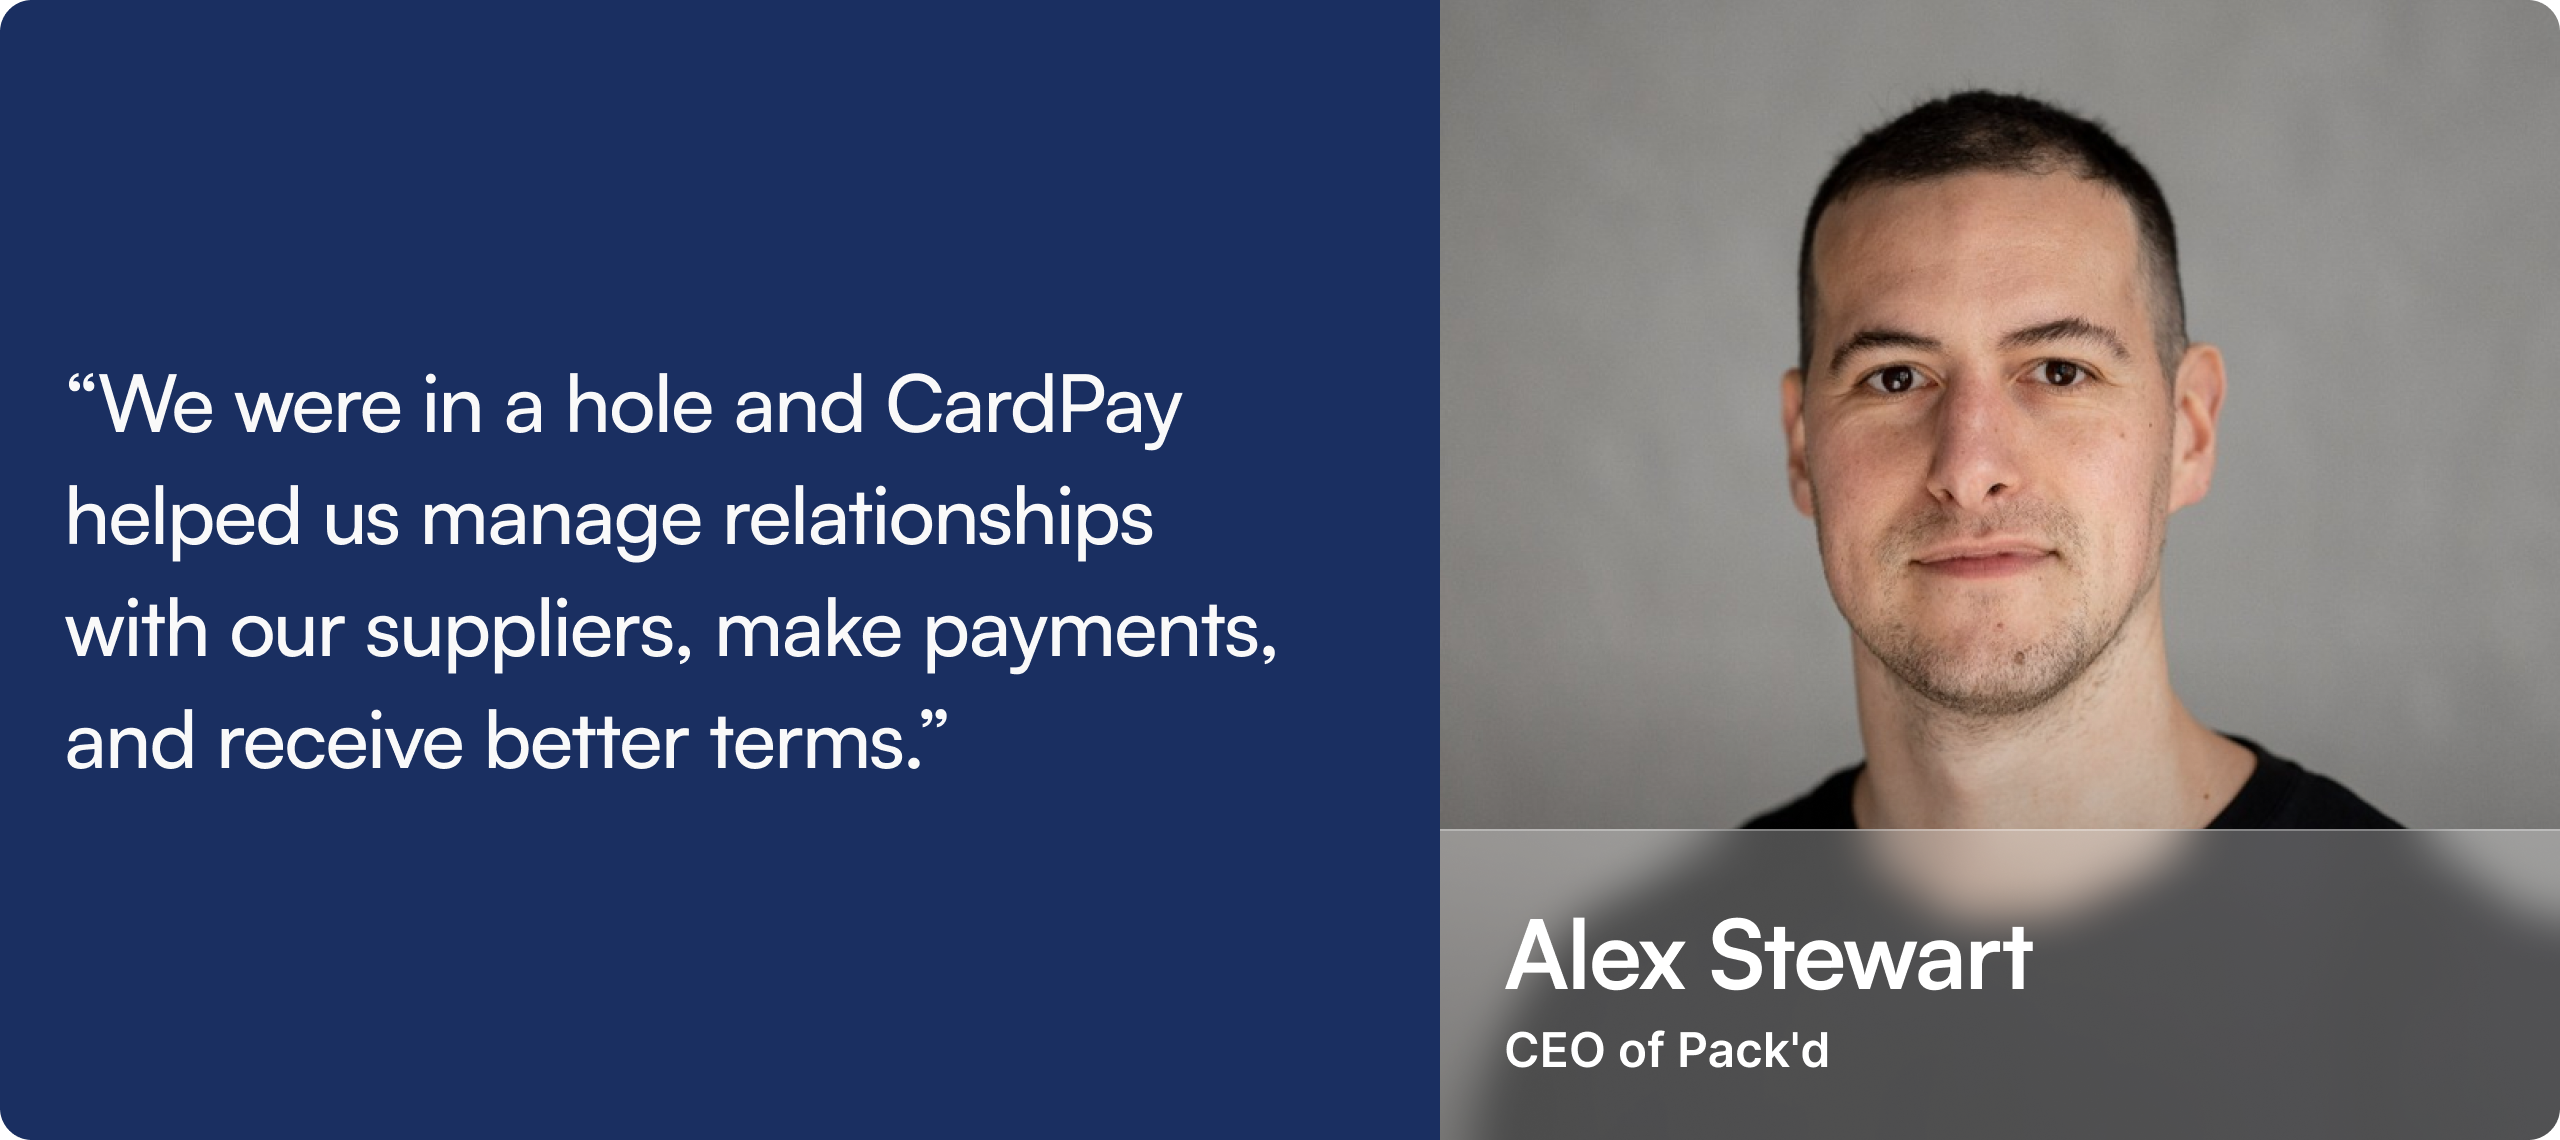 Sustainable Growth - How Pack'd Leveraged CardPay for Success